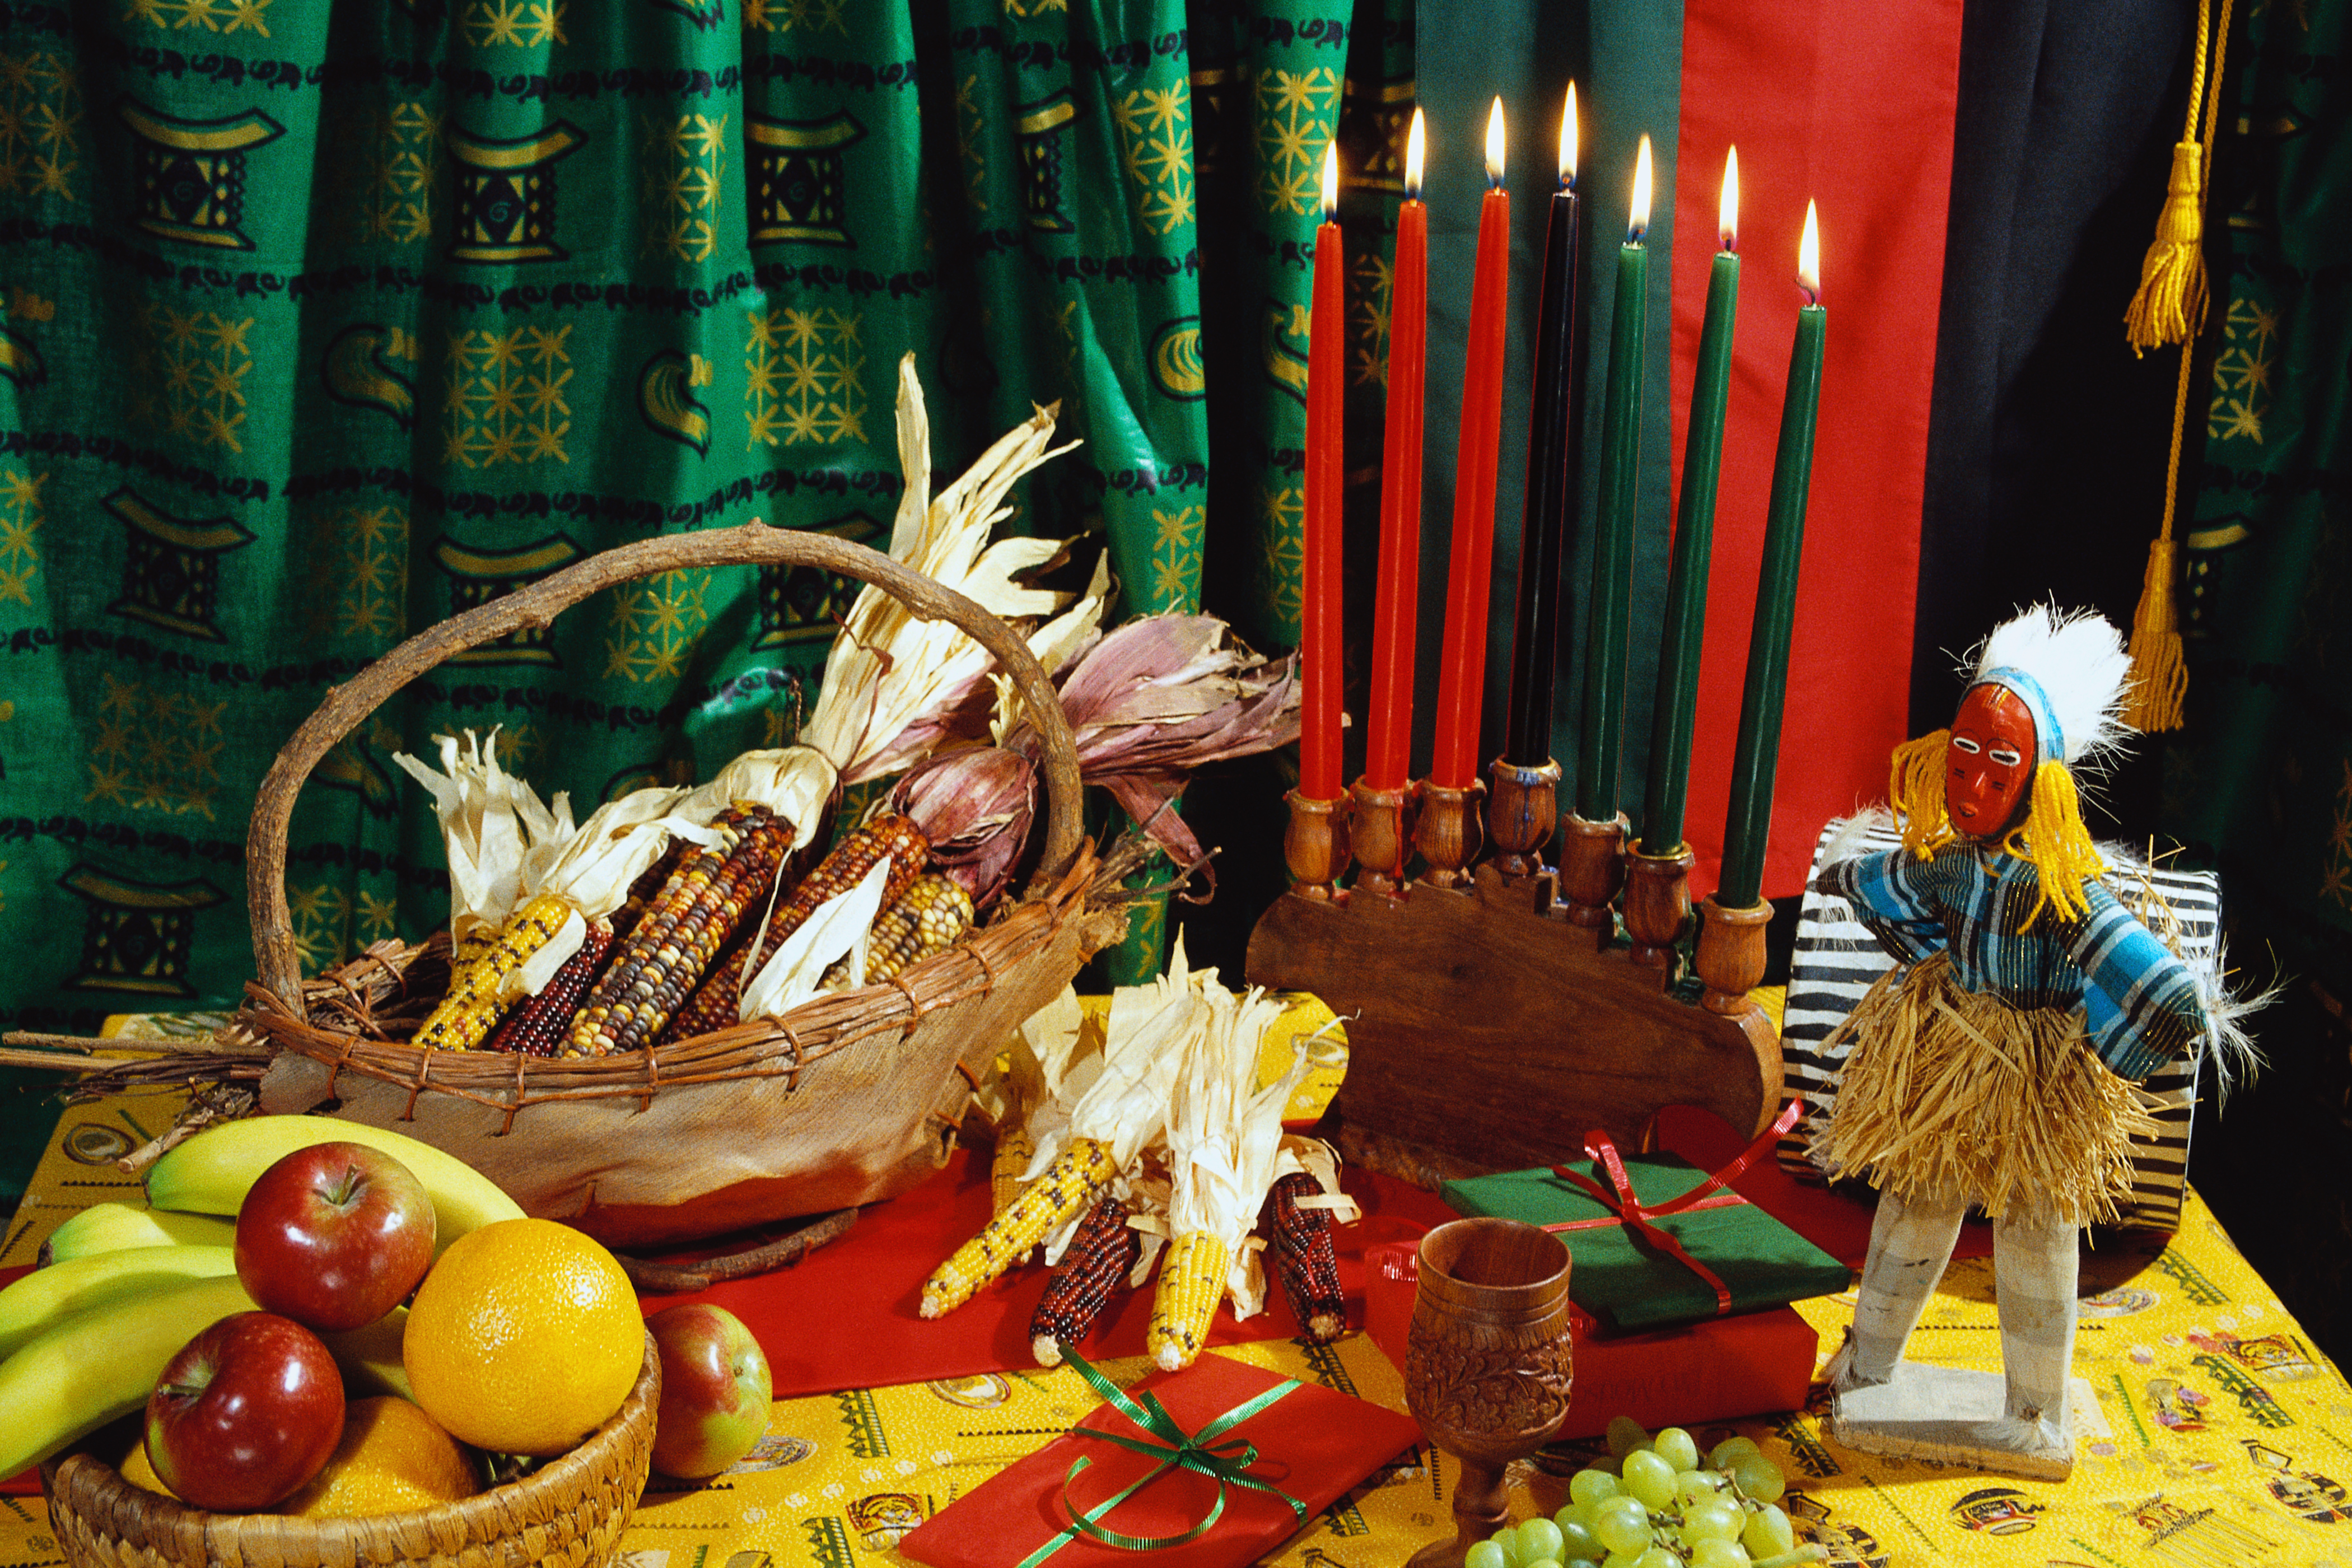 A Complete Guide To Celebrating Kwanzaa